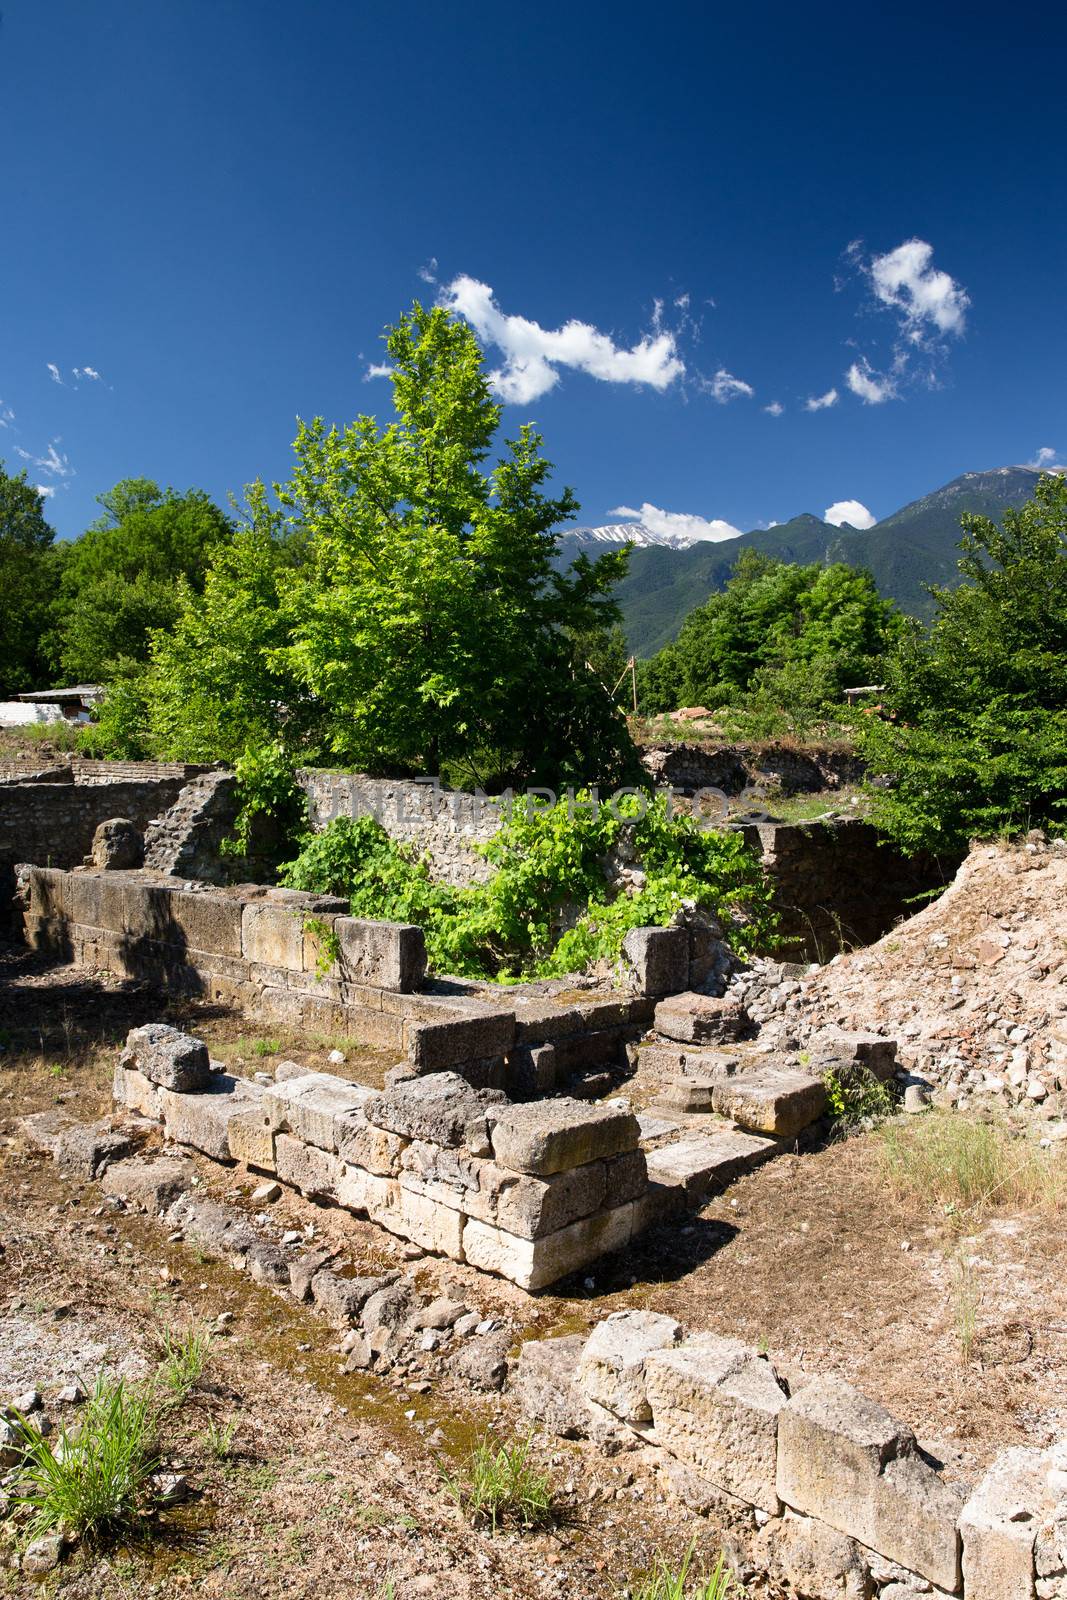 Ancient ruins in Dion, Greece.